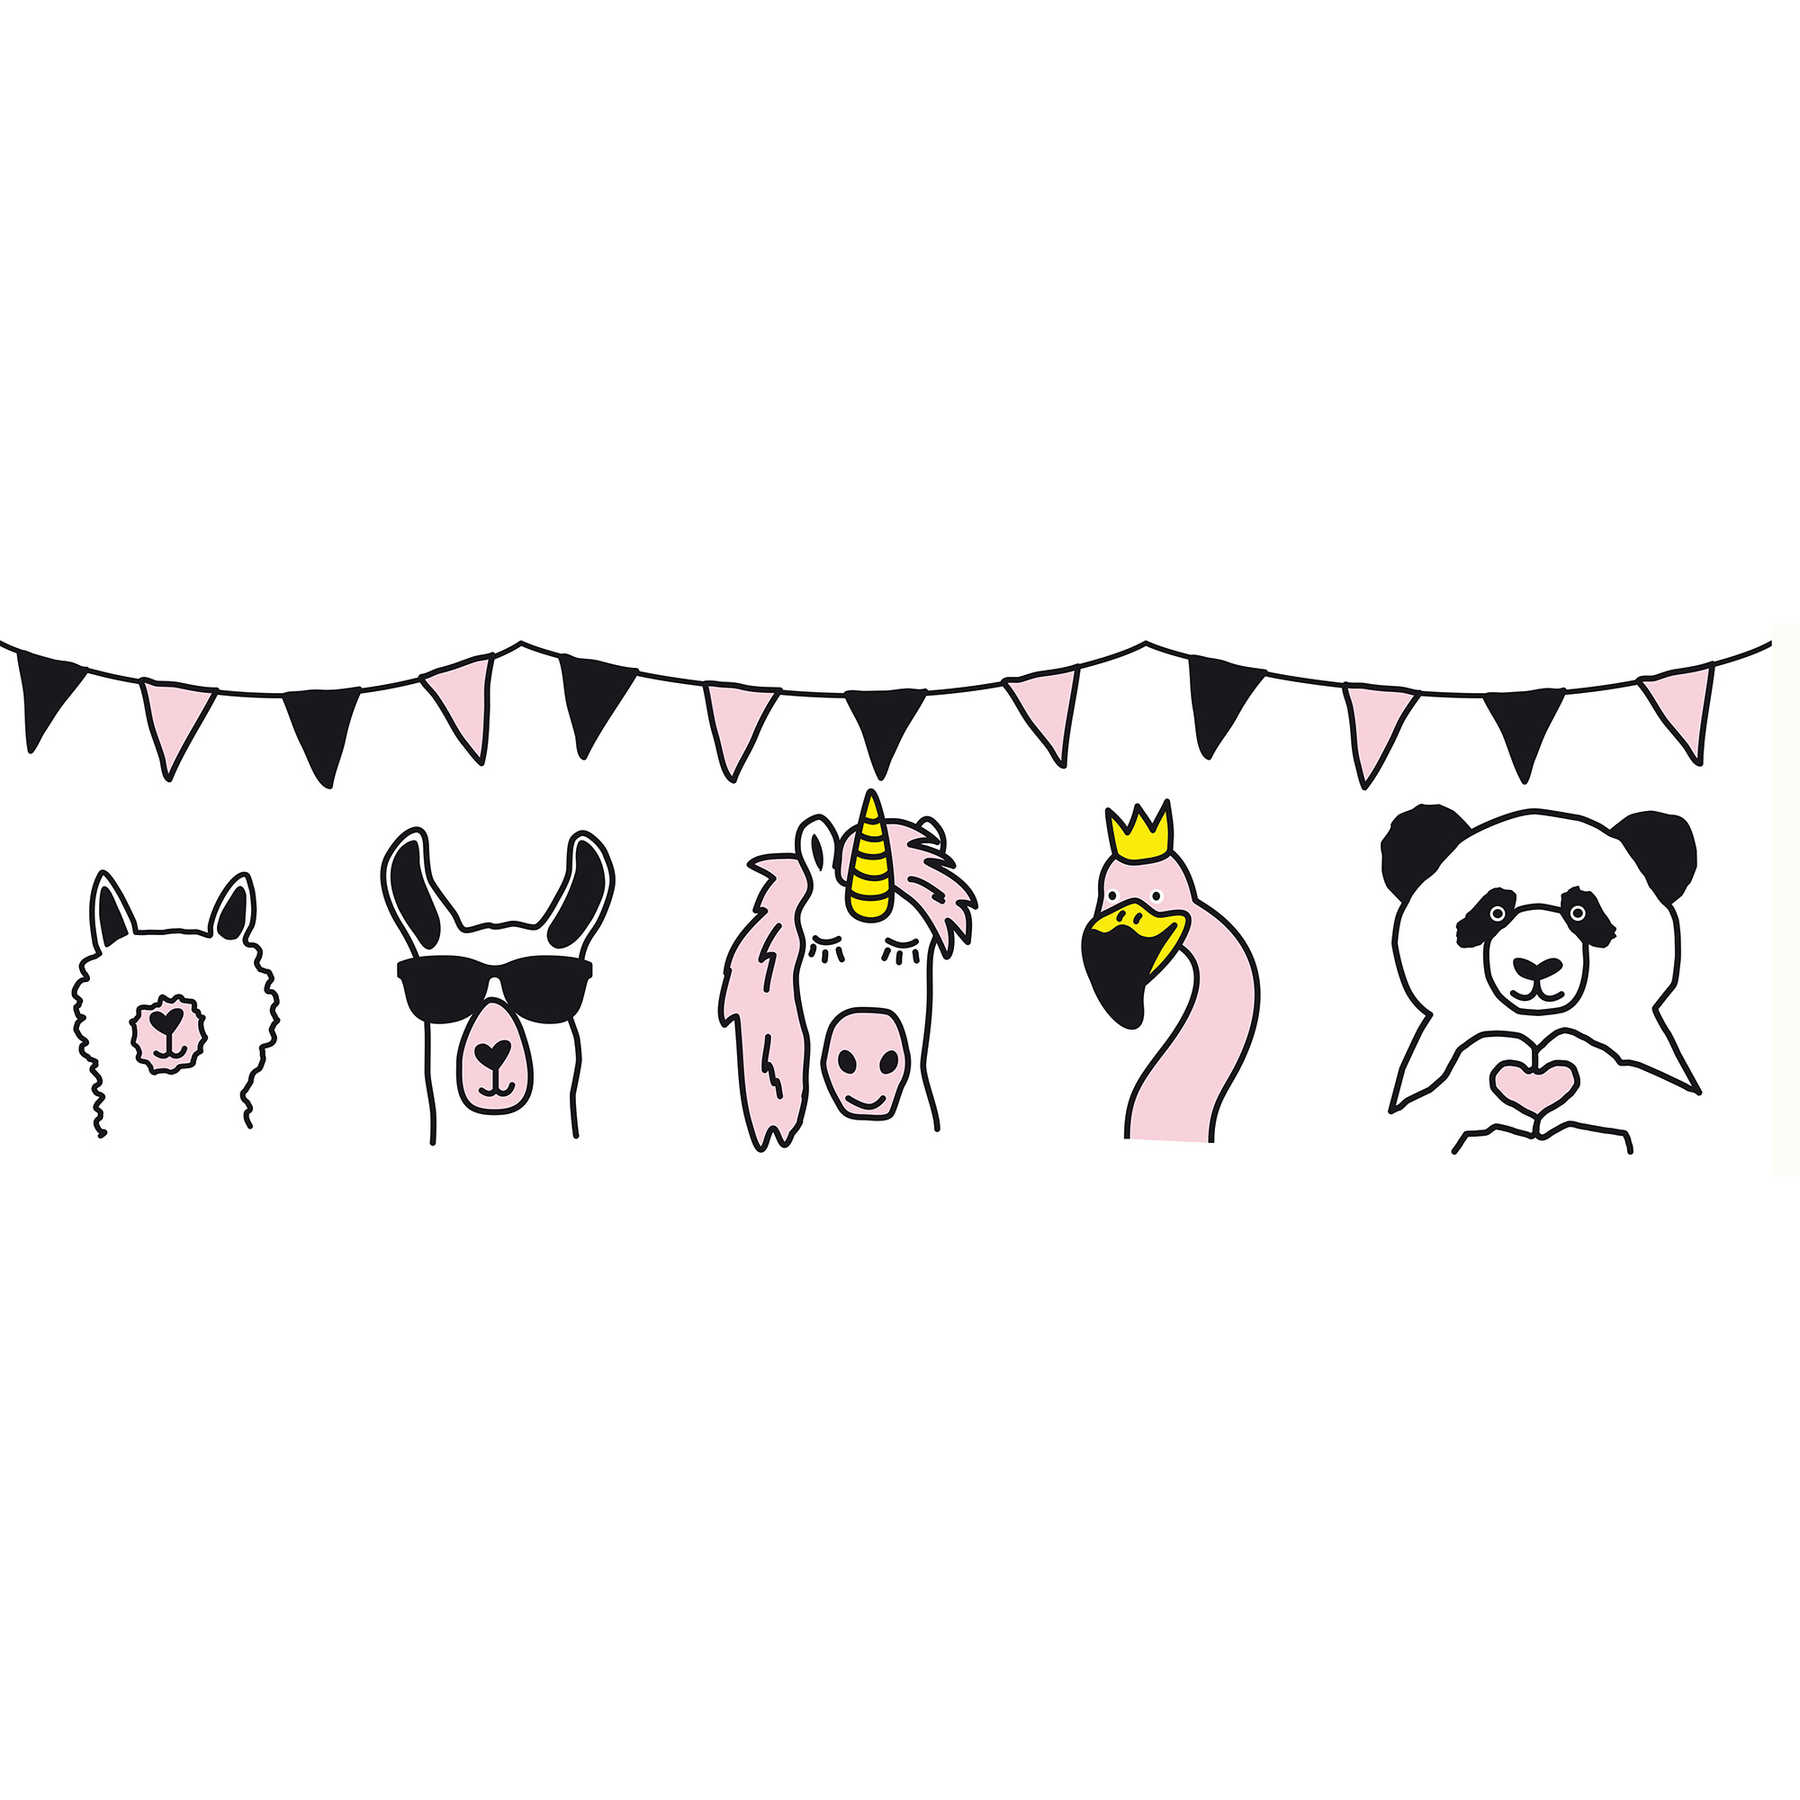 Border for Nursery "Let's get the party started" - pink, yellow, black
